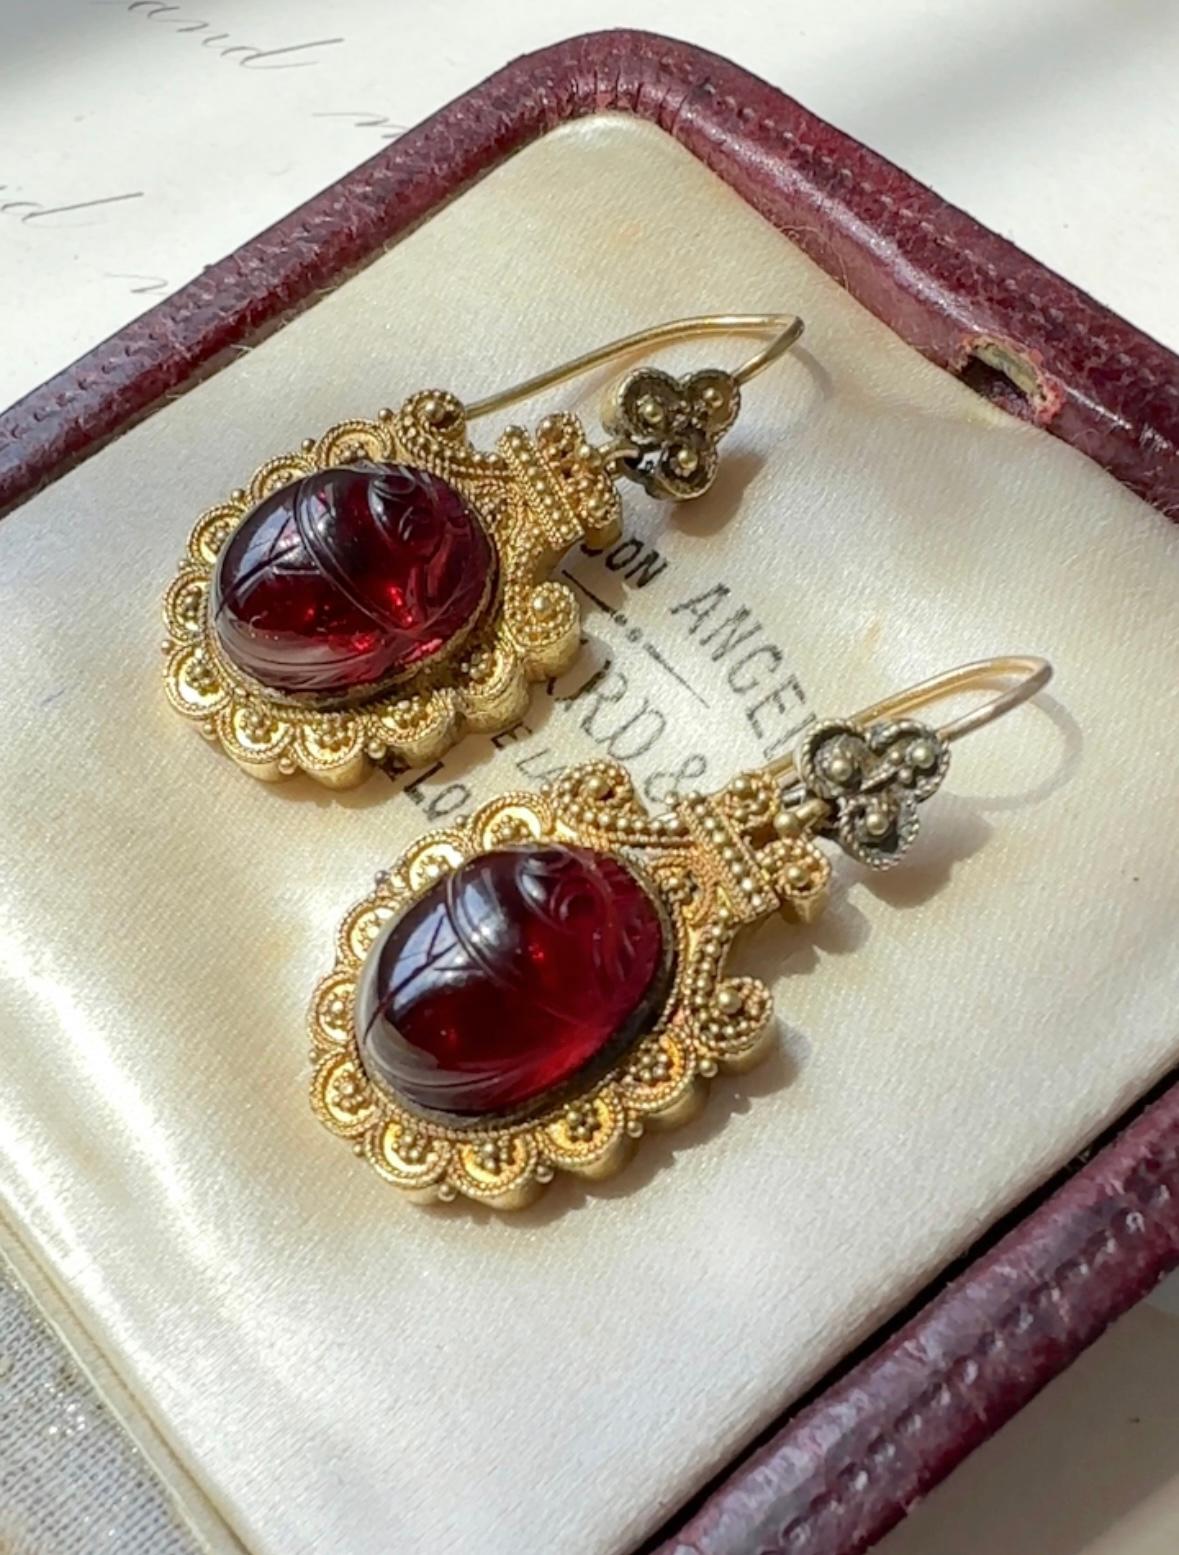 Egyptian themed jewelry became all the rage in the late 19th century after the opening of the Suez Canal in 1869. These delightful earrings feature glowing garnet scarabs mounted in warmly burnished 14k gold. Circa 1880. 

 

Symbolism: The scarab